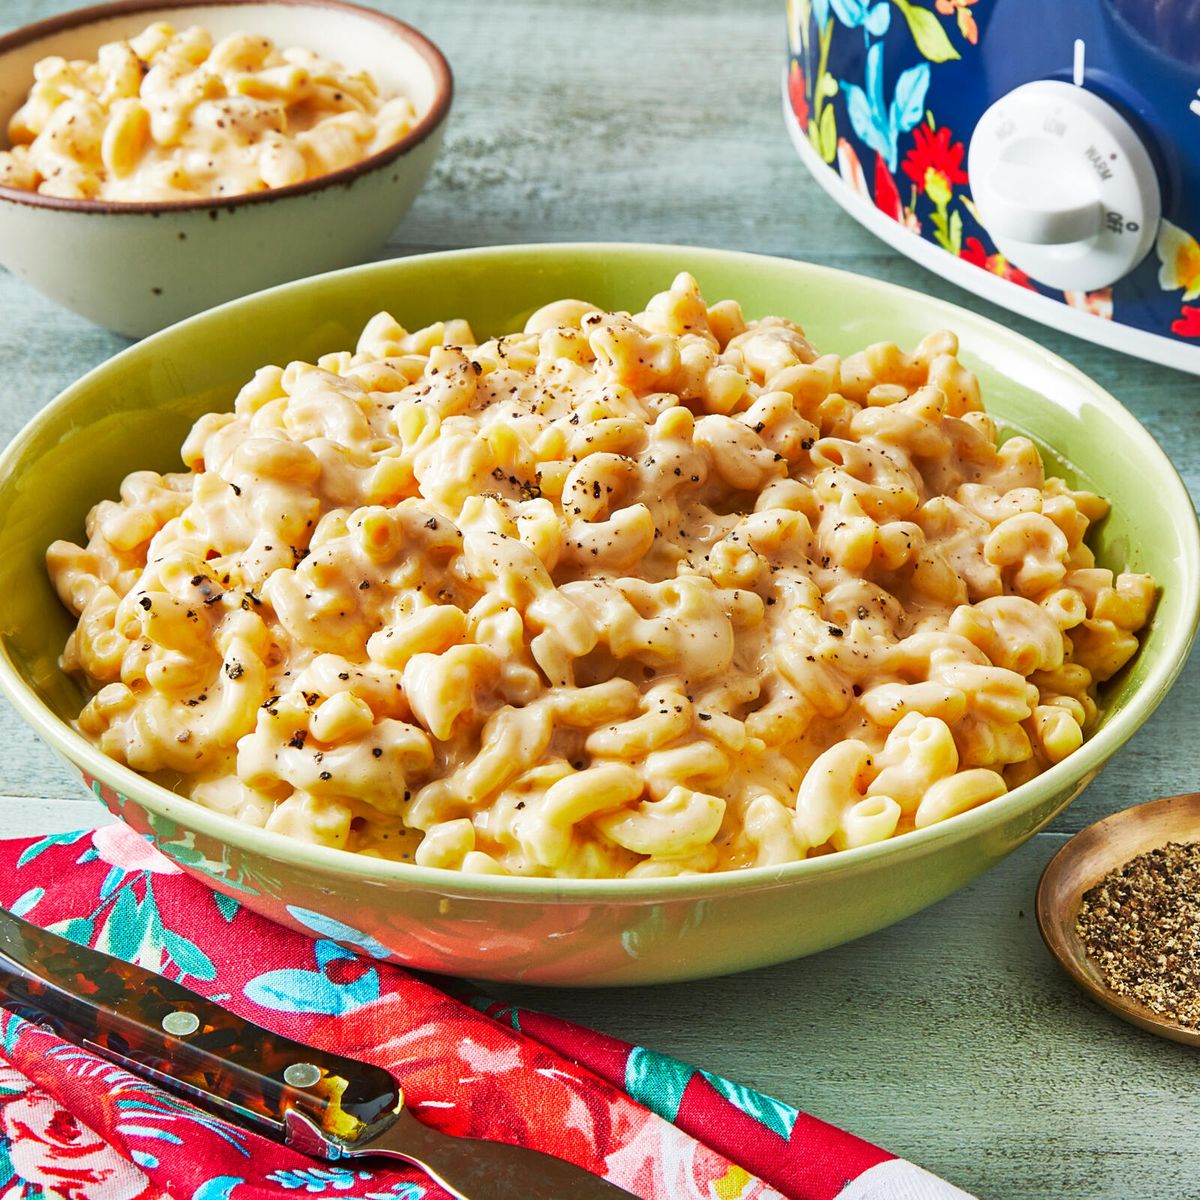 the pioneer woman's crock pot mac and cheese recipe